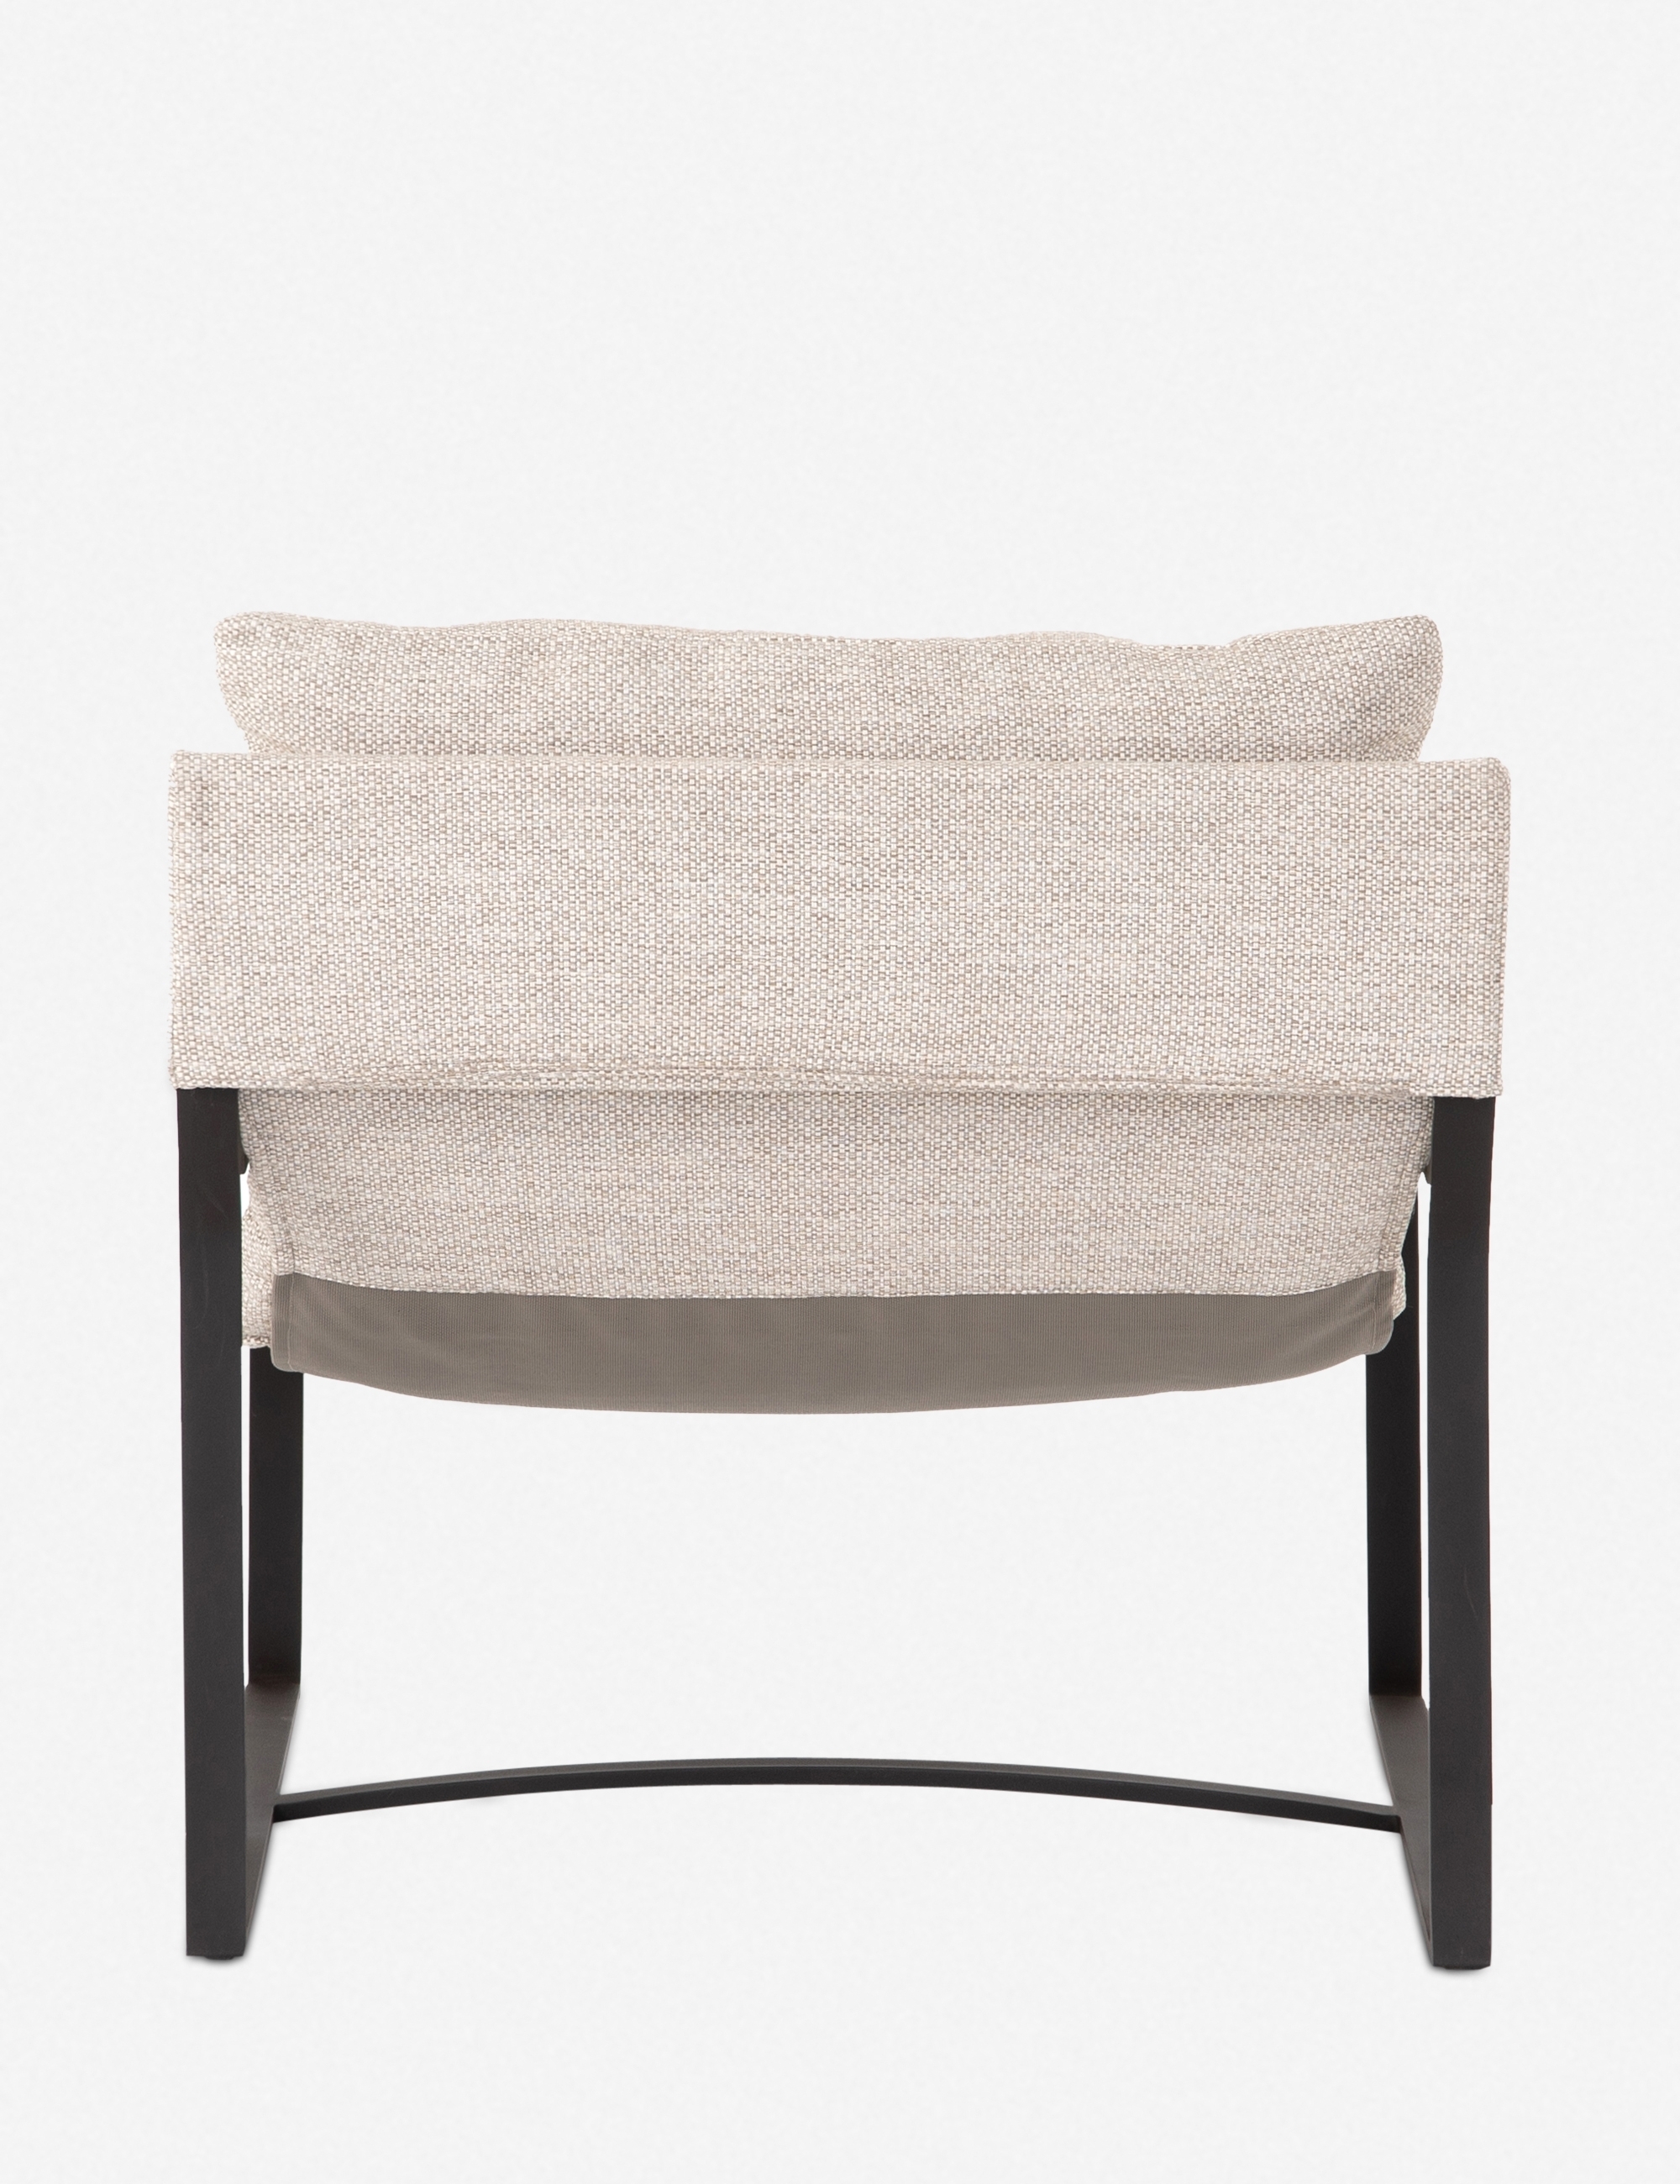 Pali Outdoor Accent Chair - Image 4